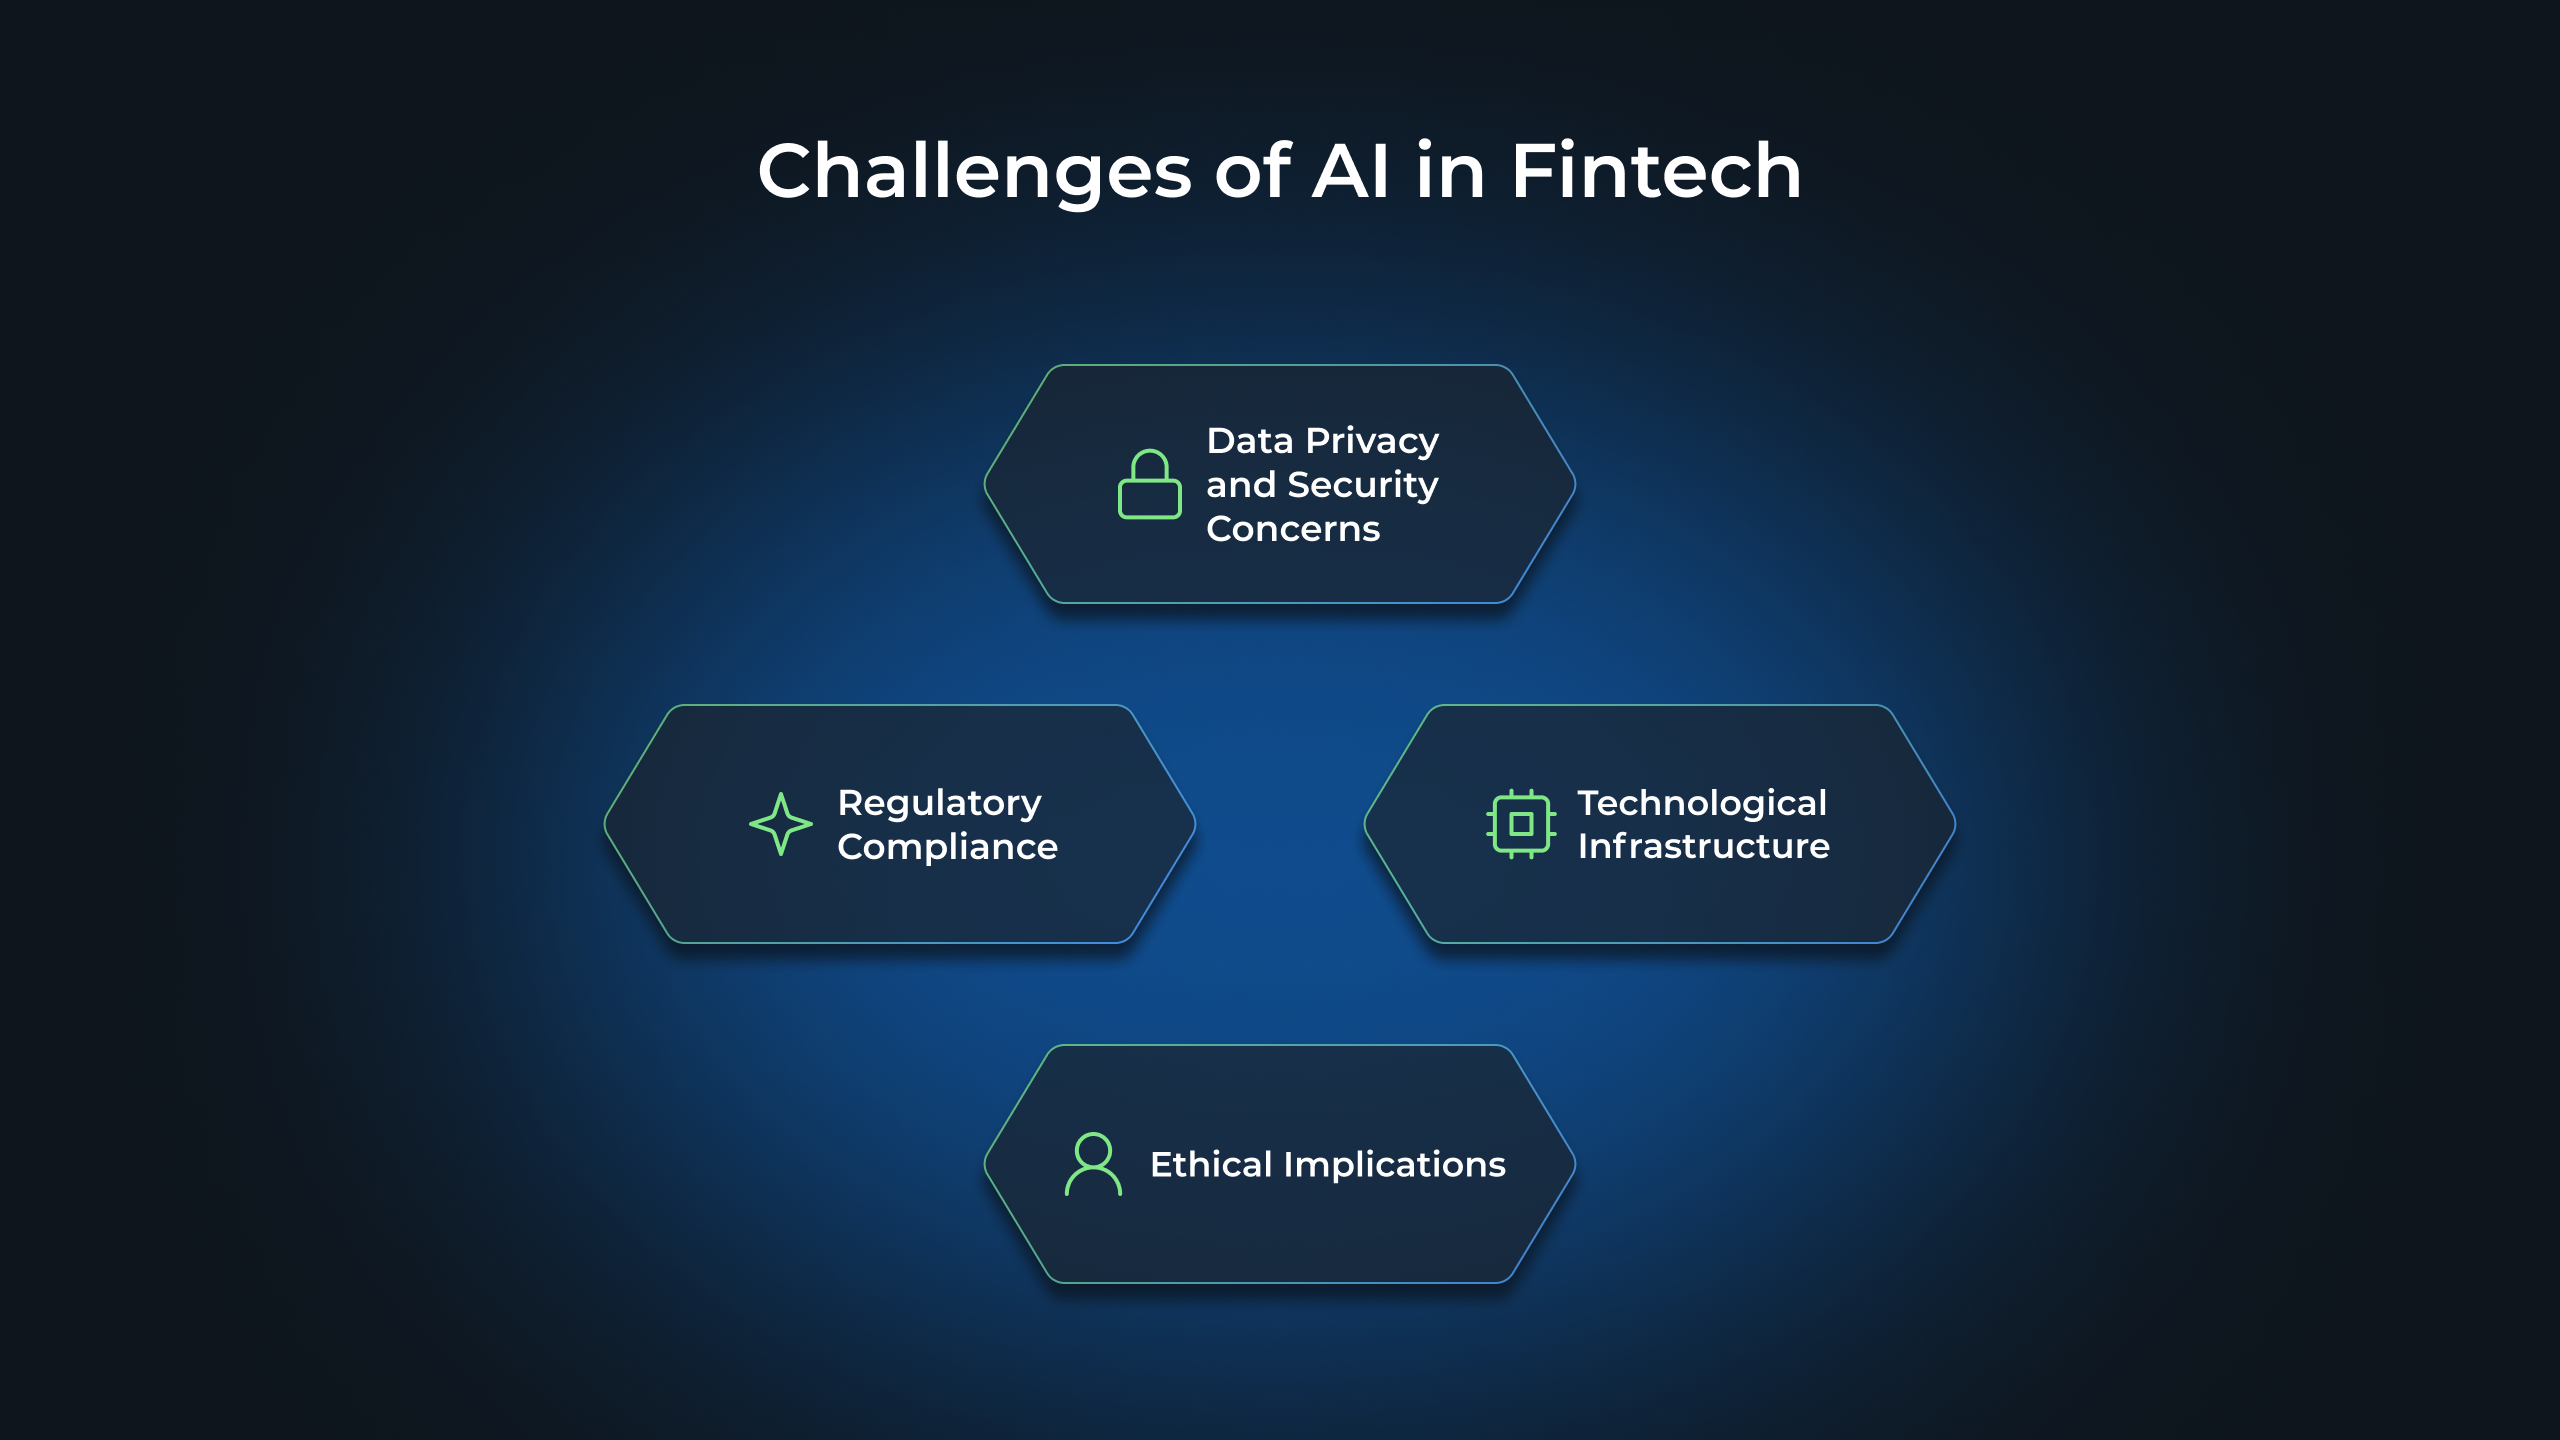 Challenges of AI in Fintech: Data Privacy and Security Concerns, Regulatory Compliance, Technological Infrastructure, Ethical Implications
